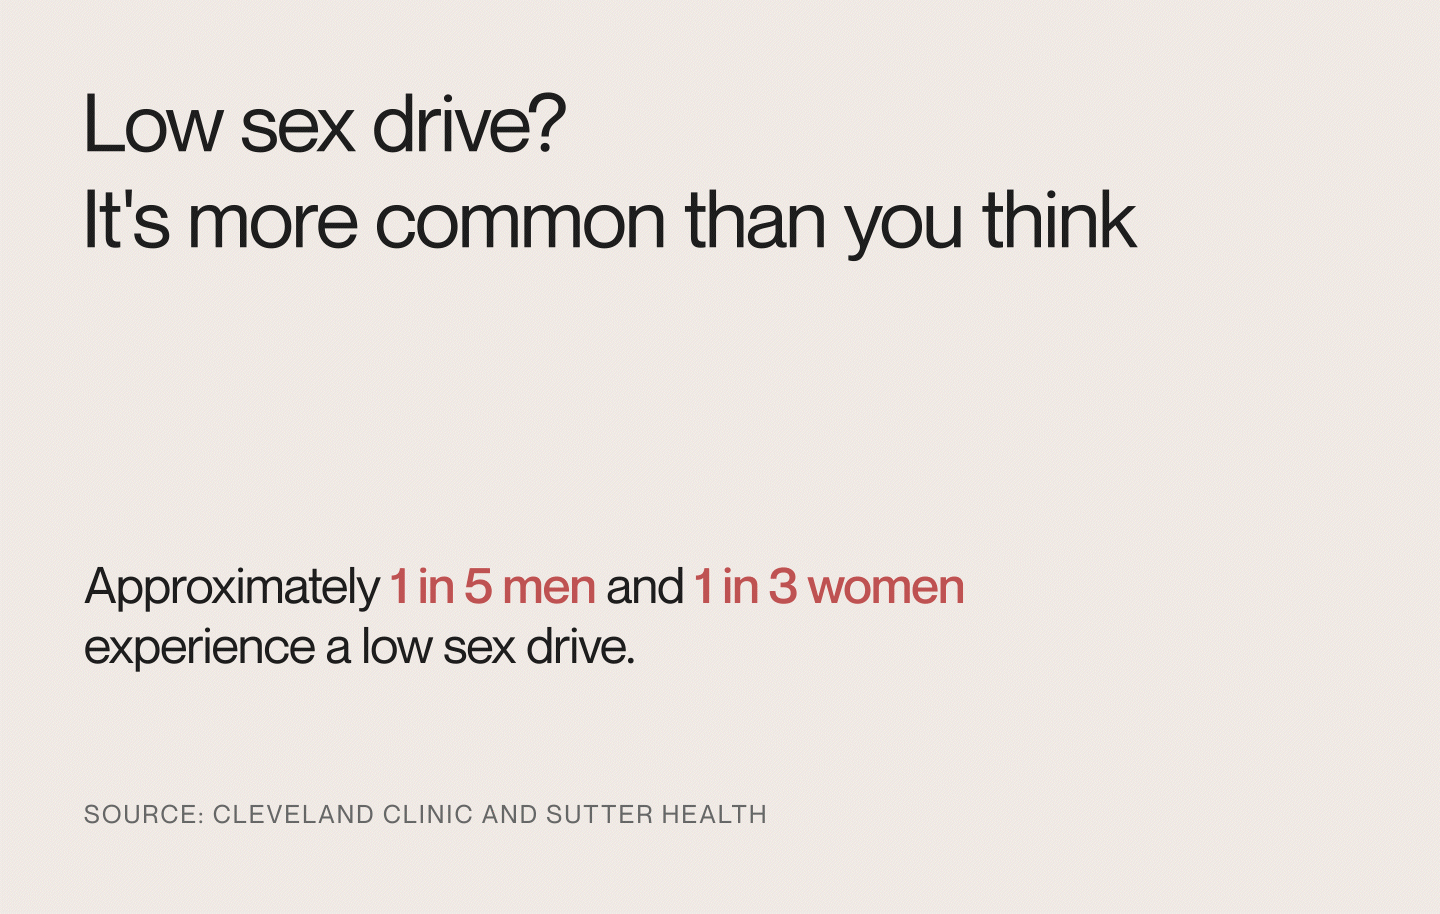 Roughly 20 percent of men and 33 percent of women have a low sex drive.